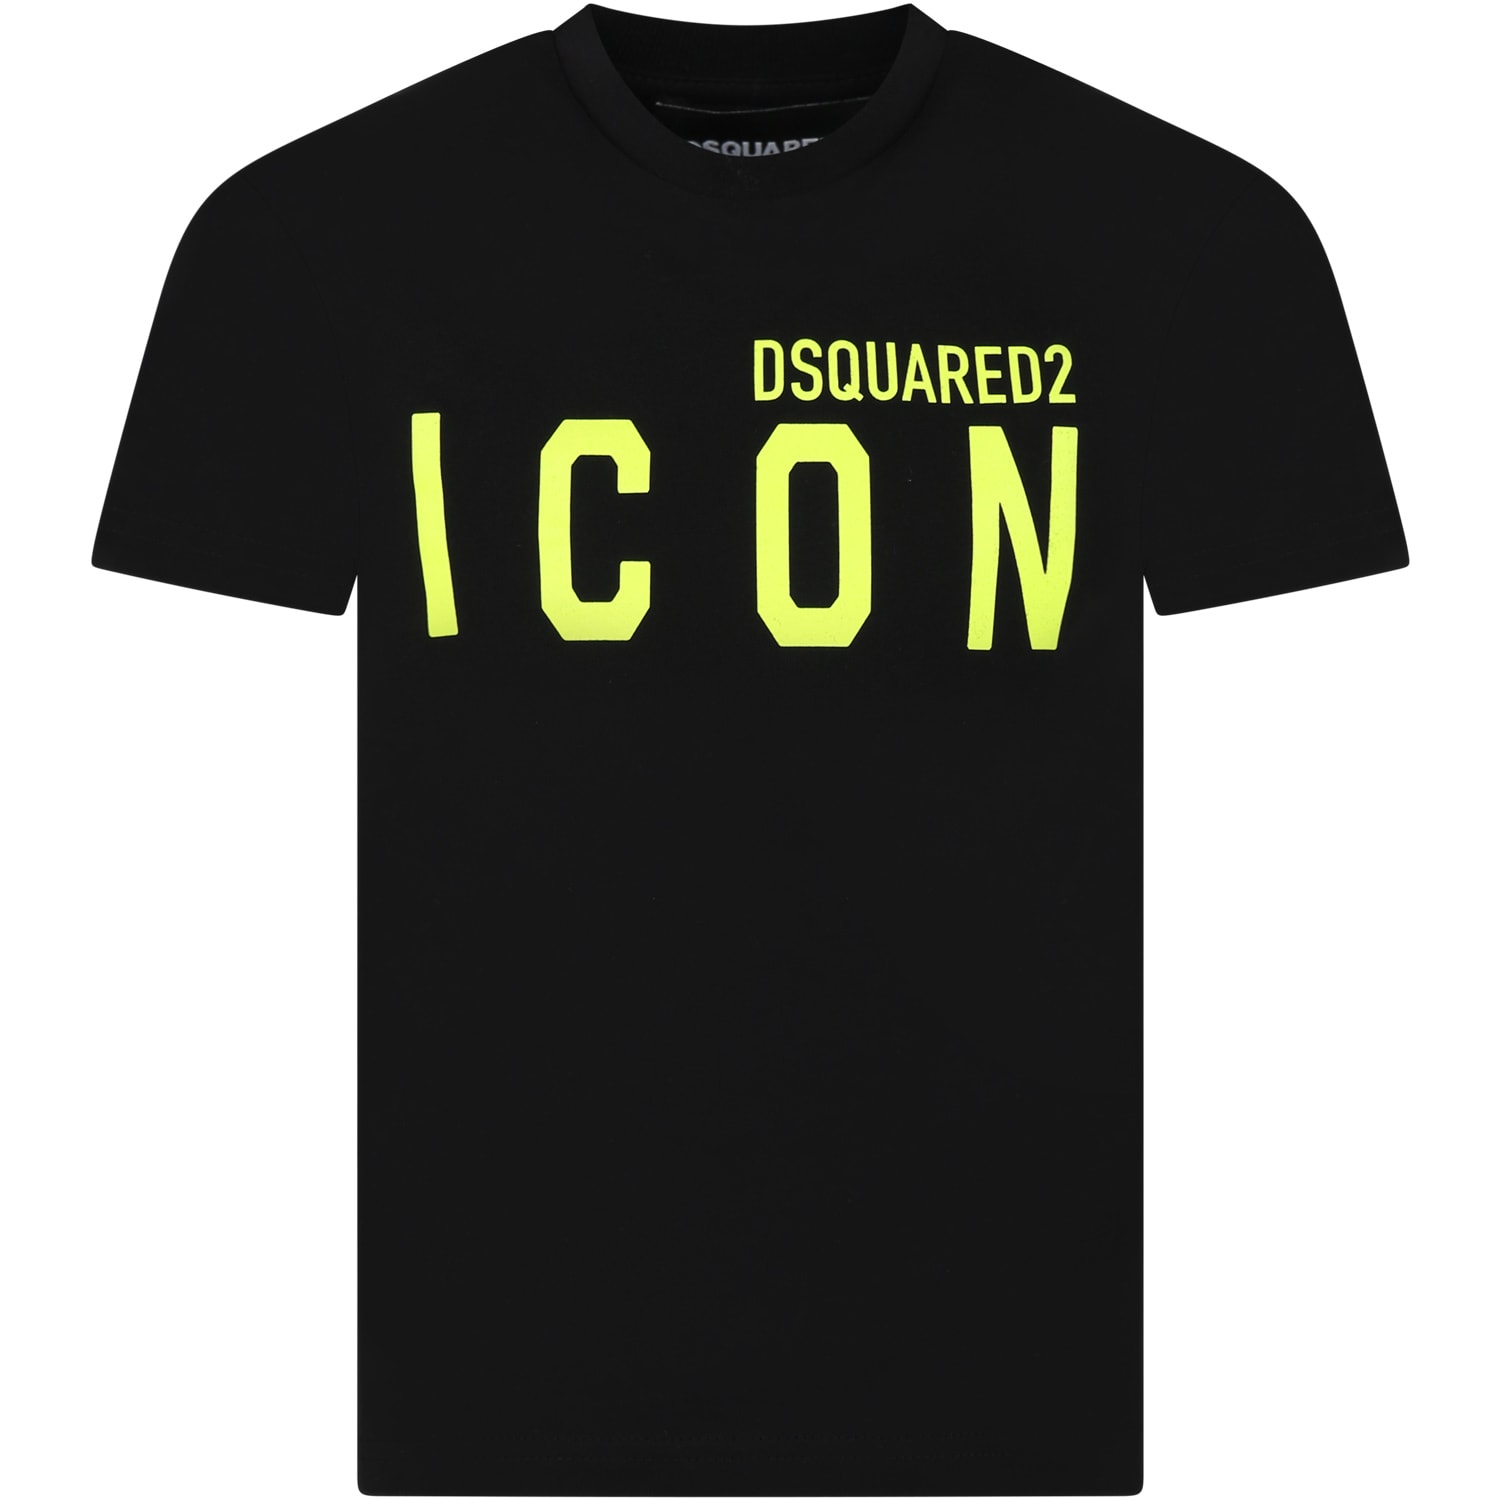 DSQUARED2 t-shirt RELAX Yellow